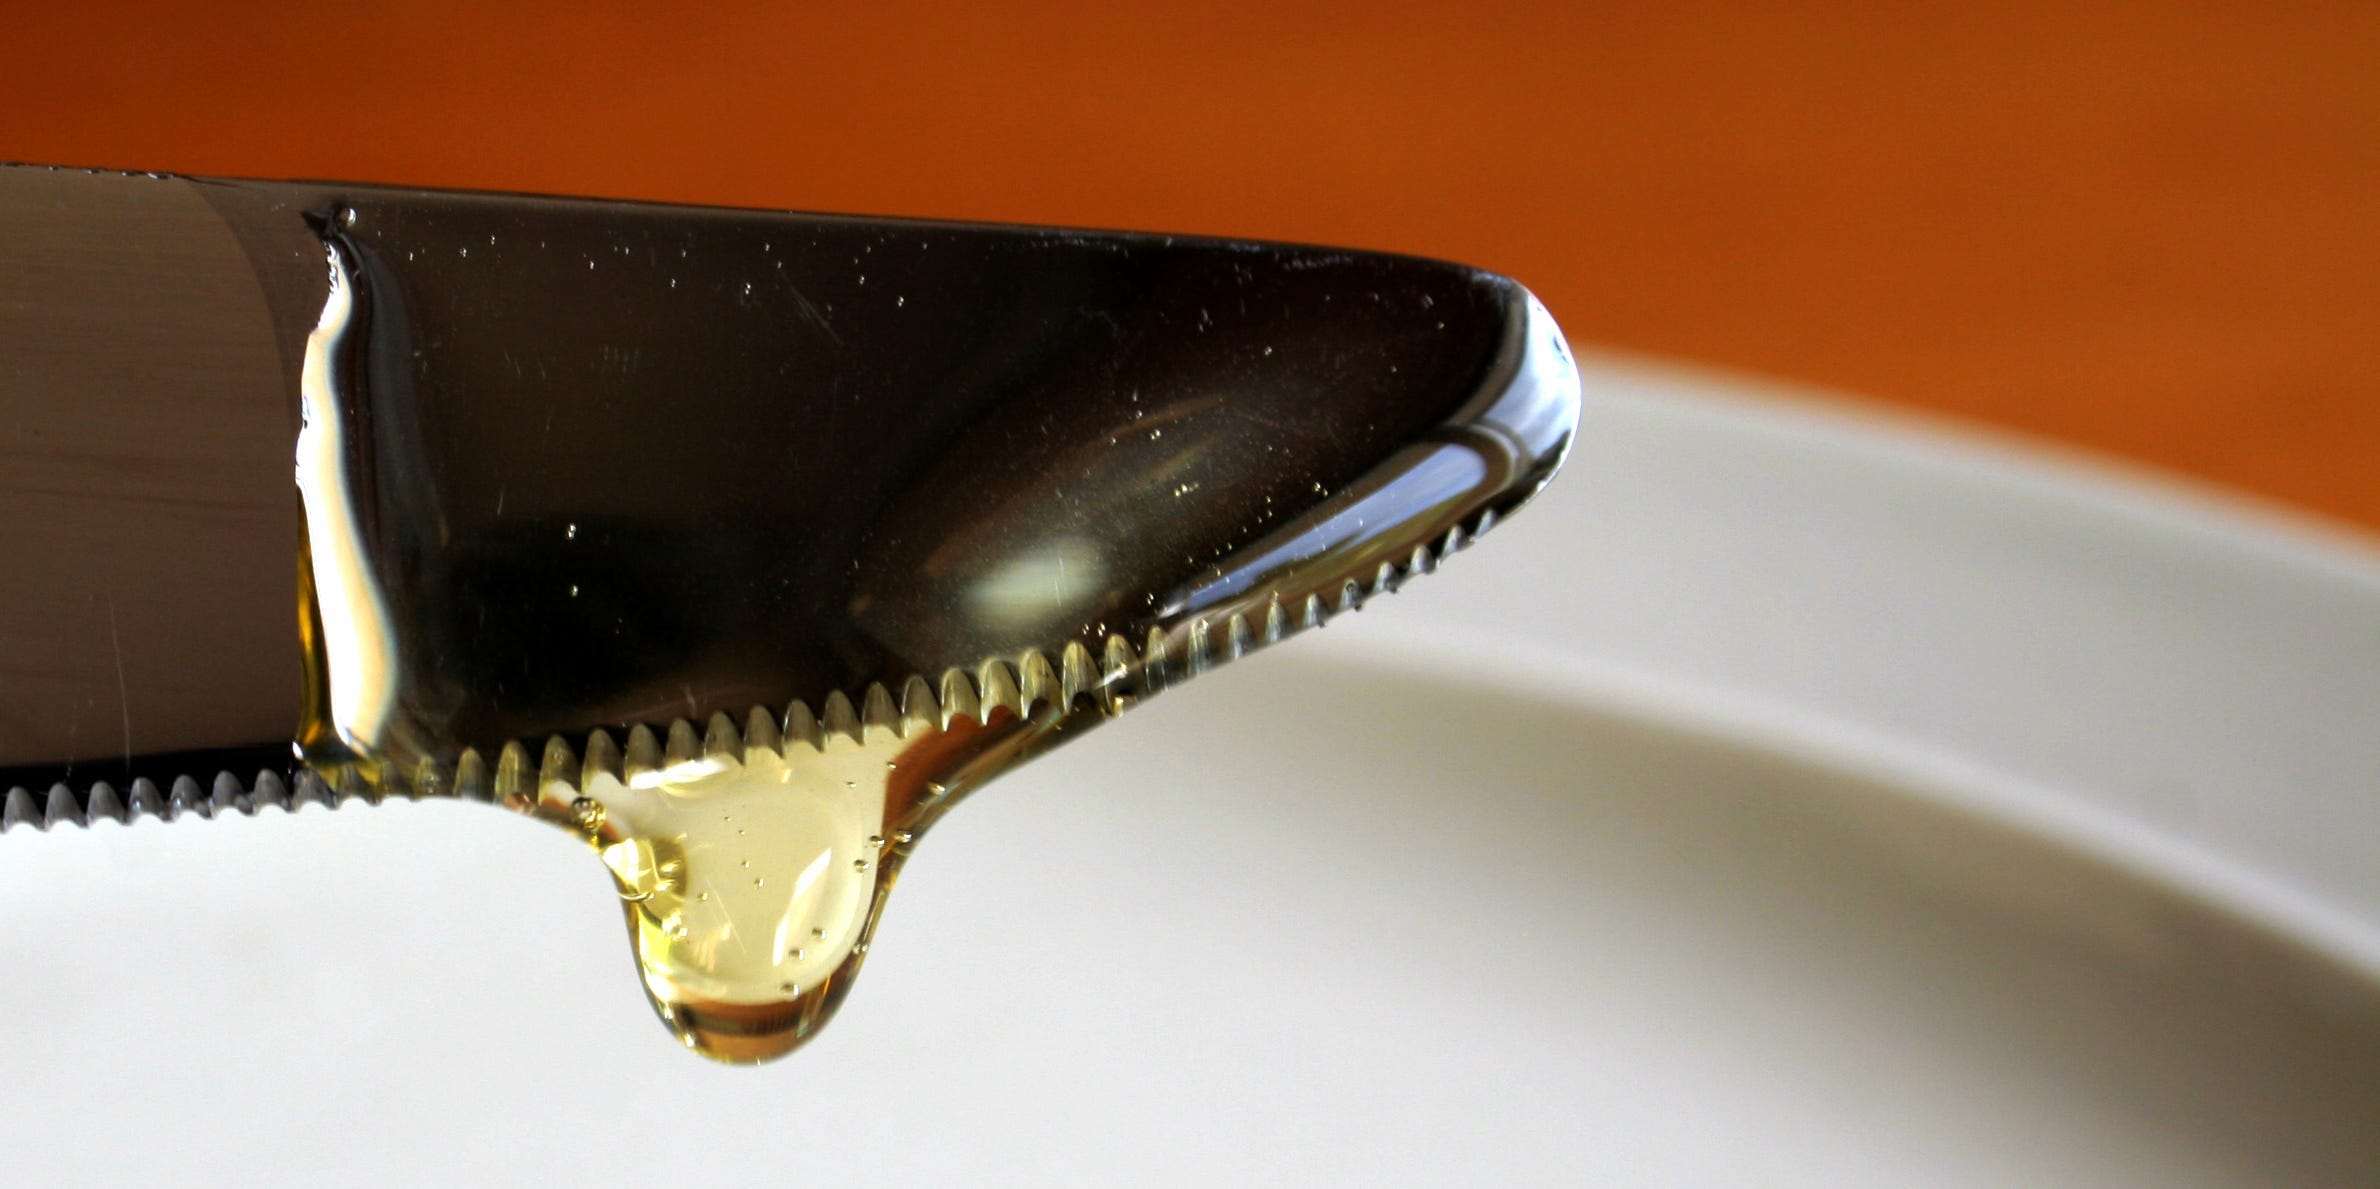 Corn syrup dripping from a knife.